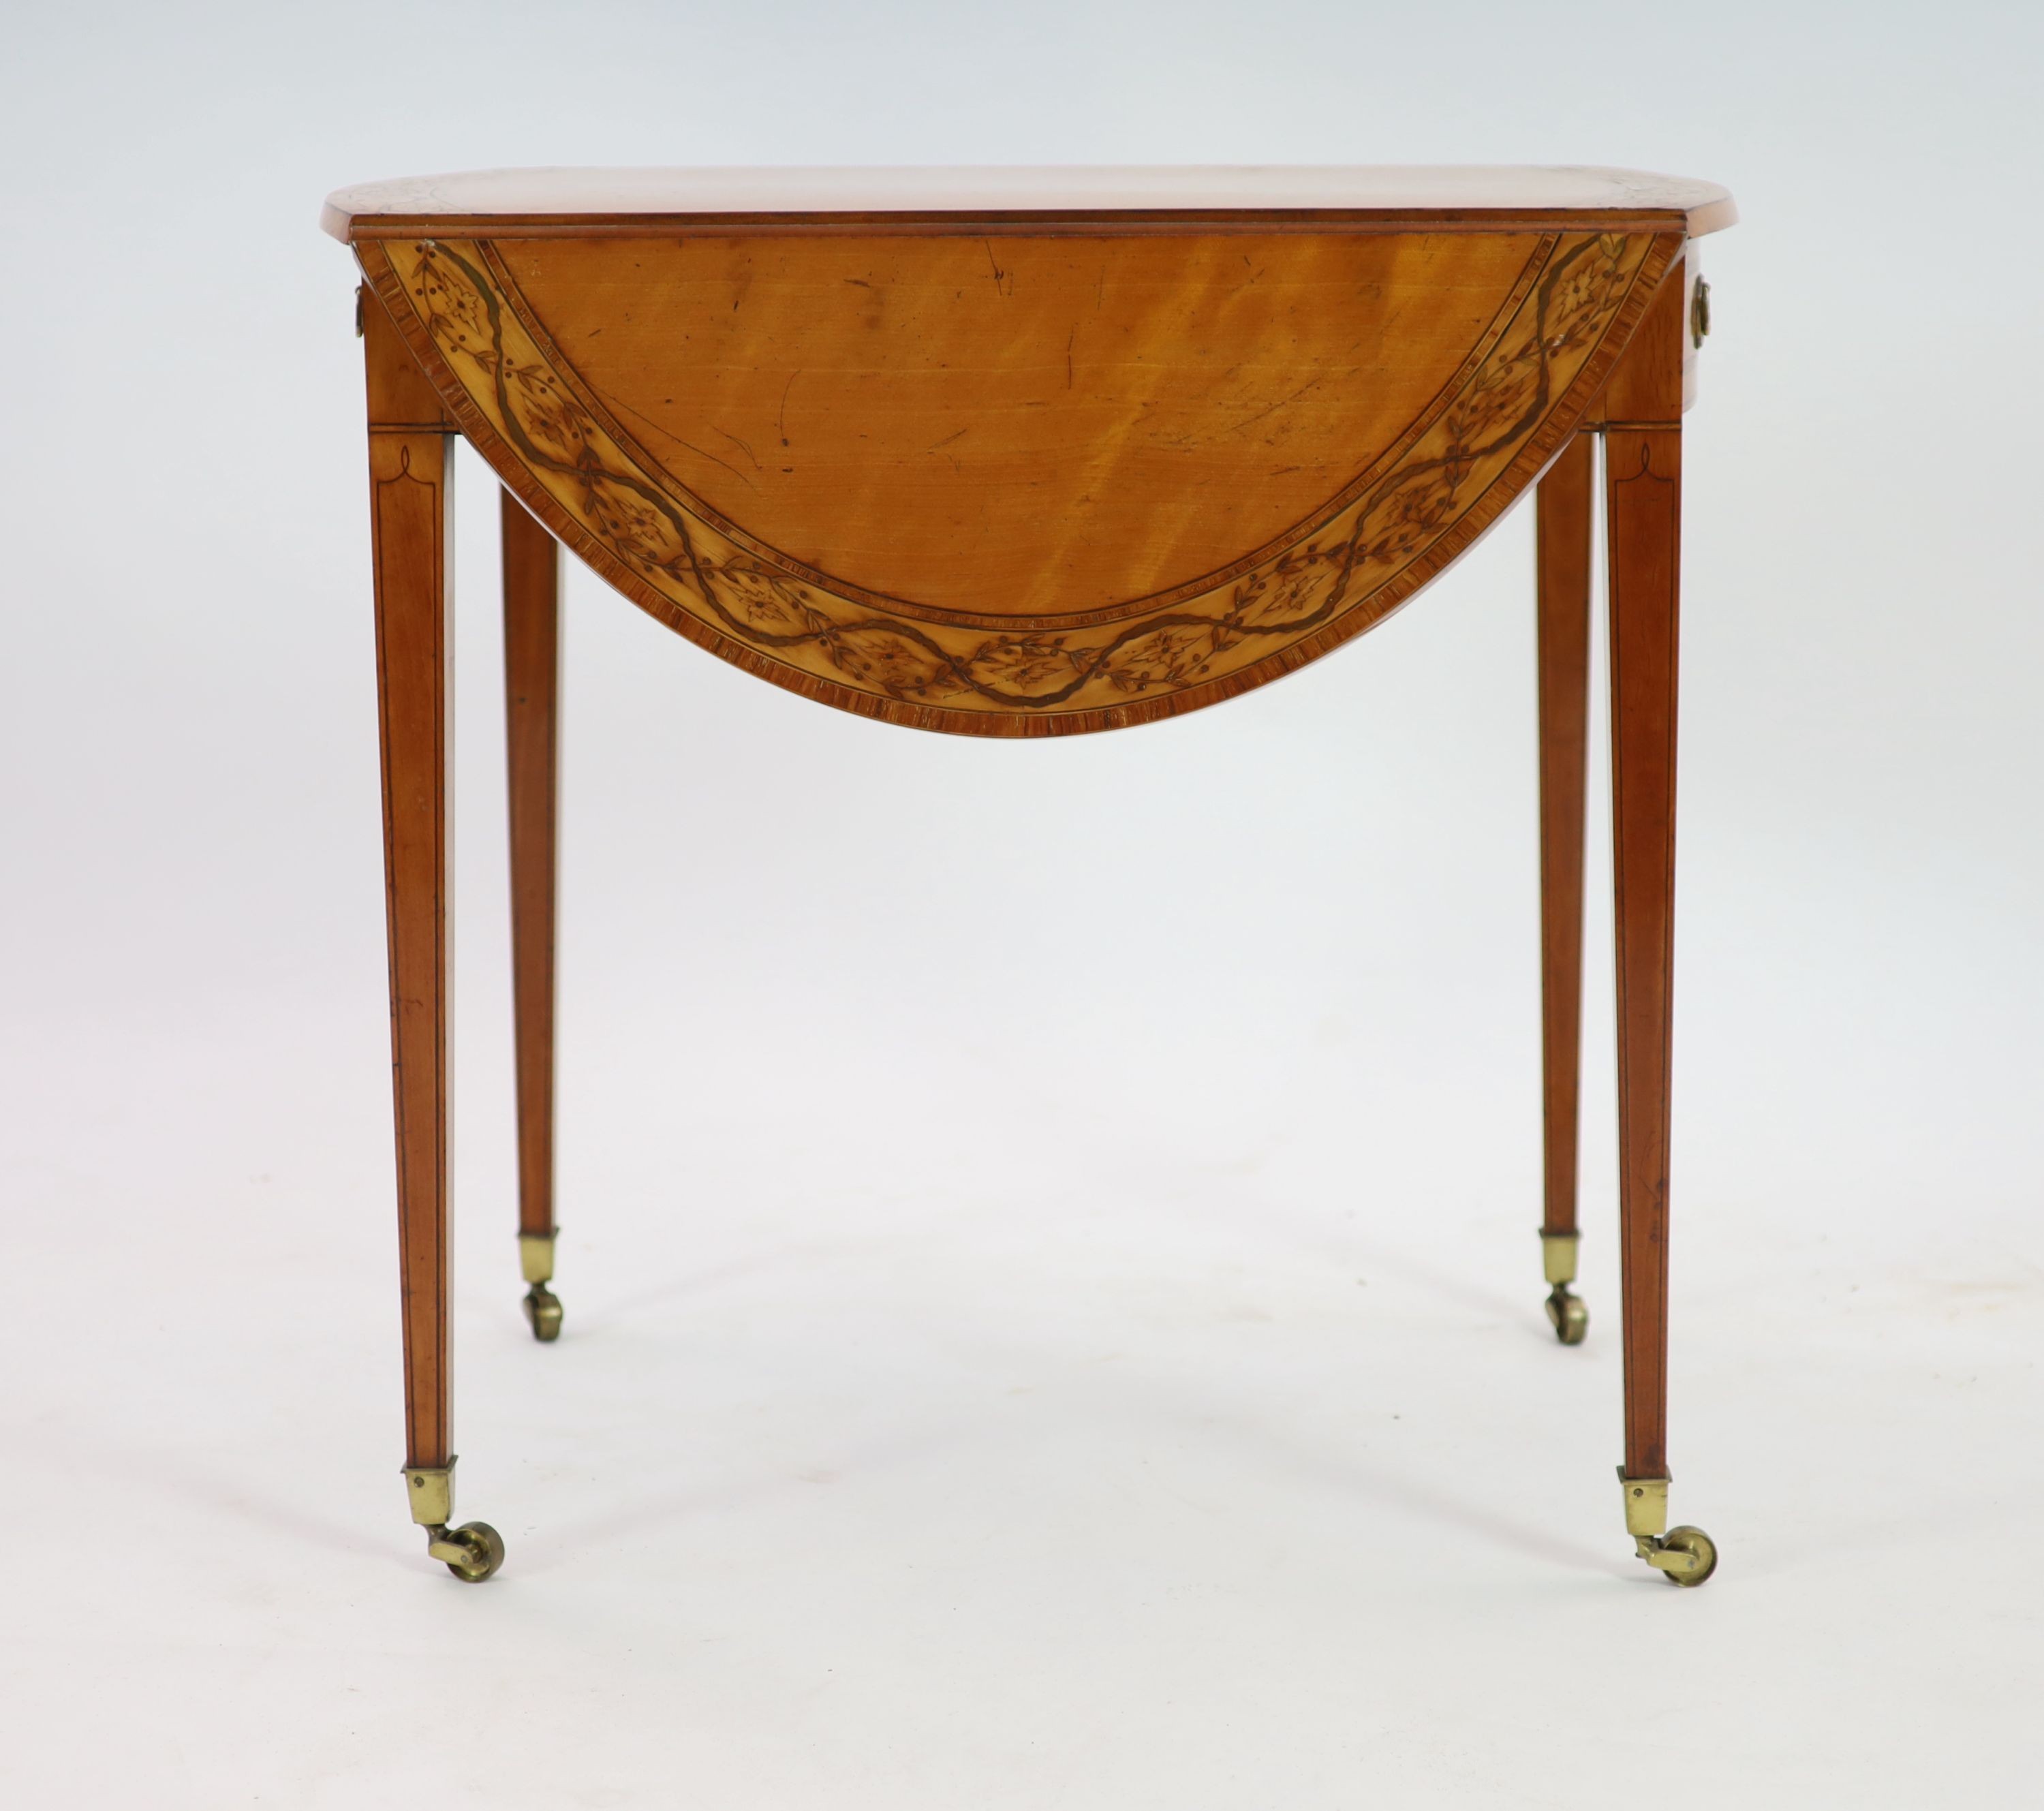 A George III Sheraton style marquetry inlaid satinwood Pembroke table,the oval top with rosewood and - Image 3 of 4